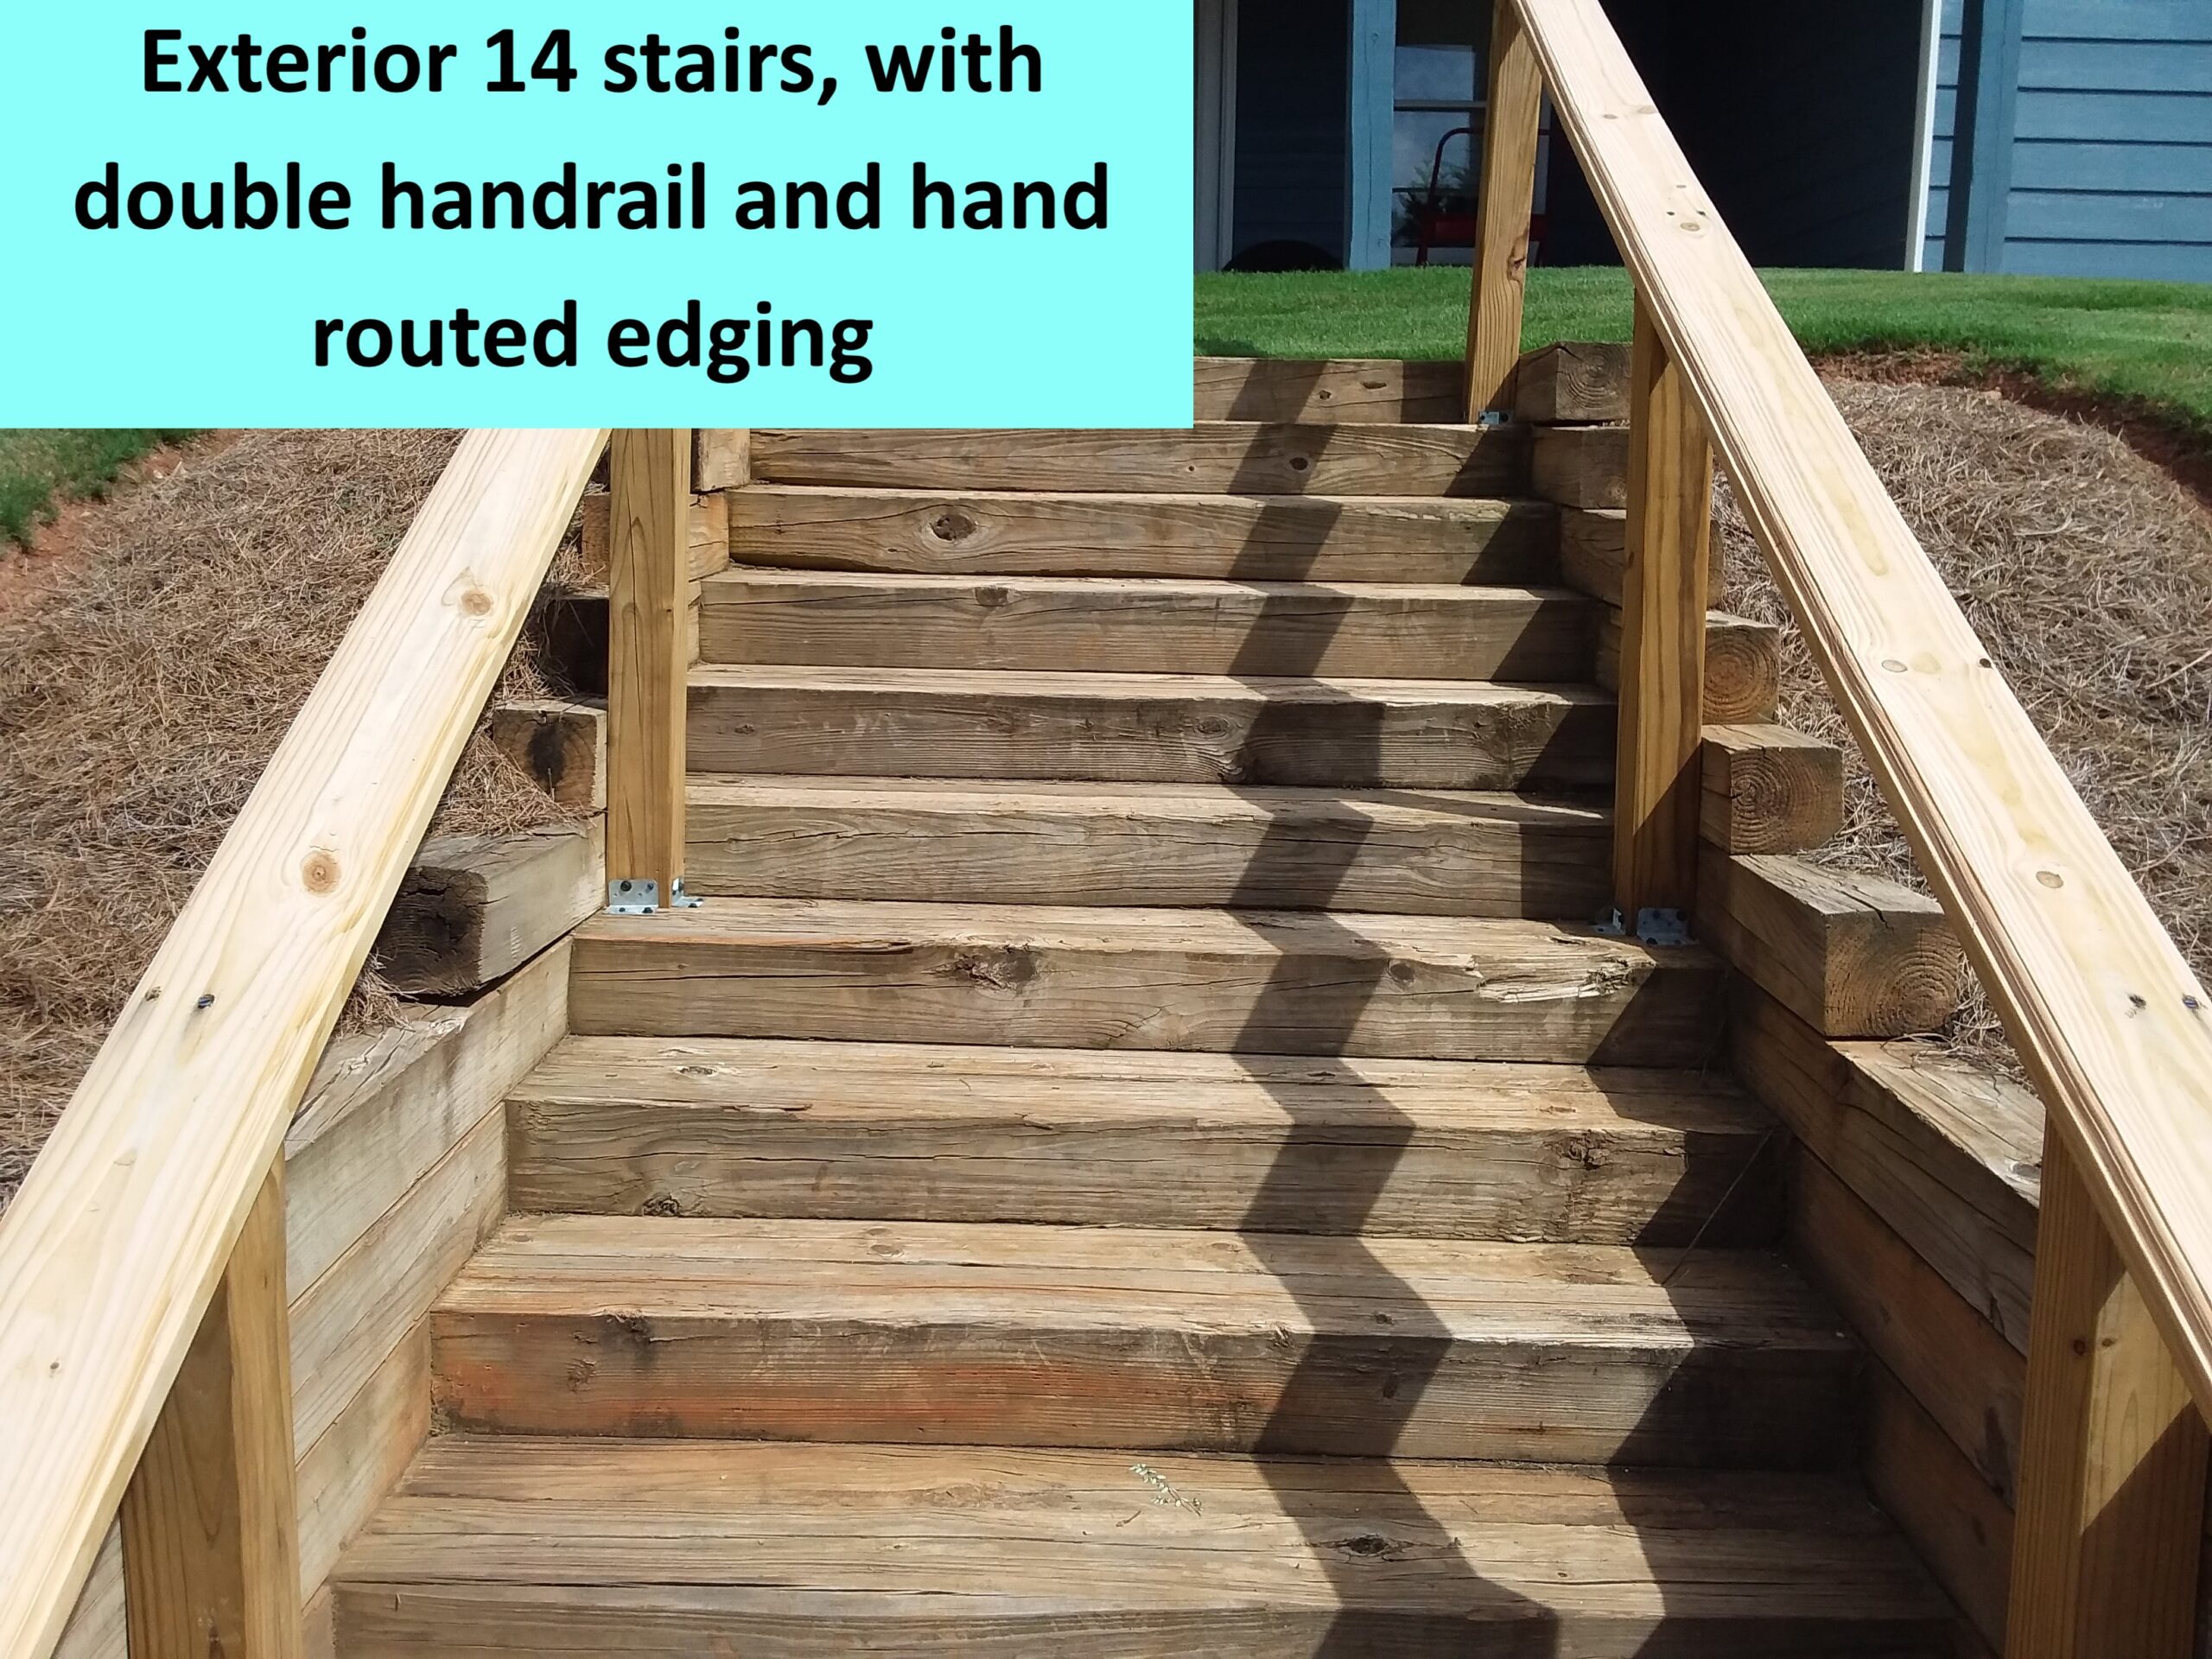 An exterior wooden staircase built by MGS construction in a backyard.